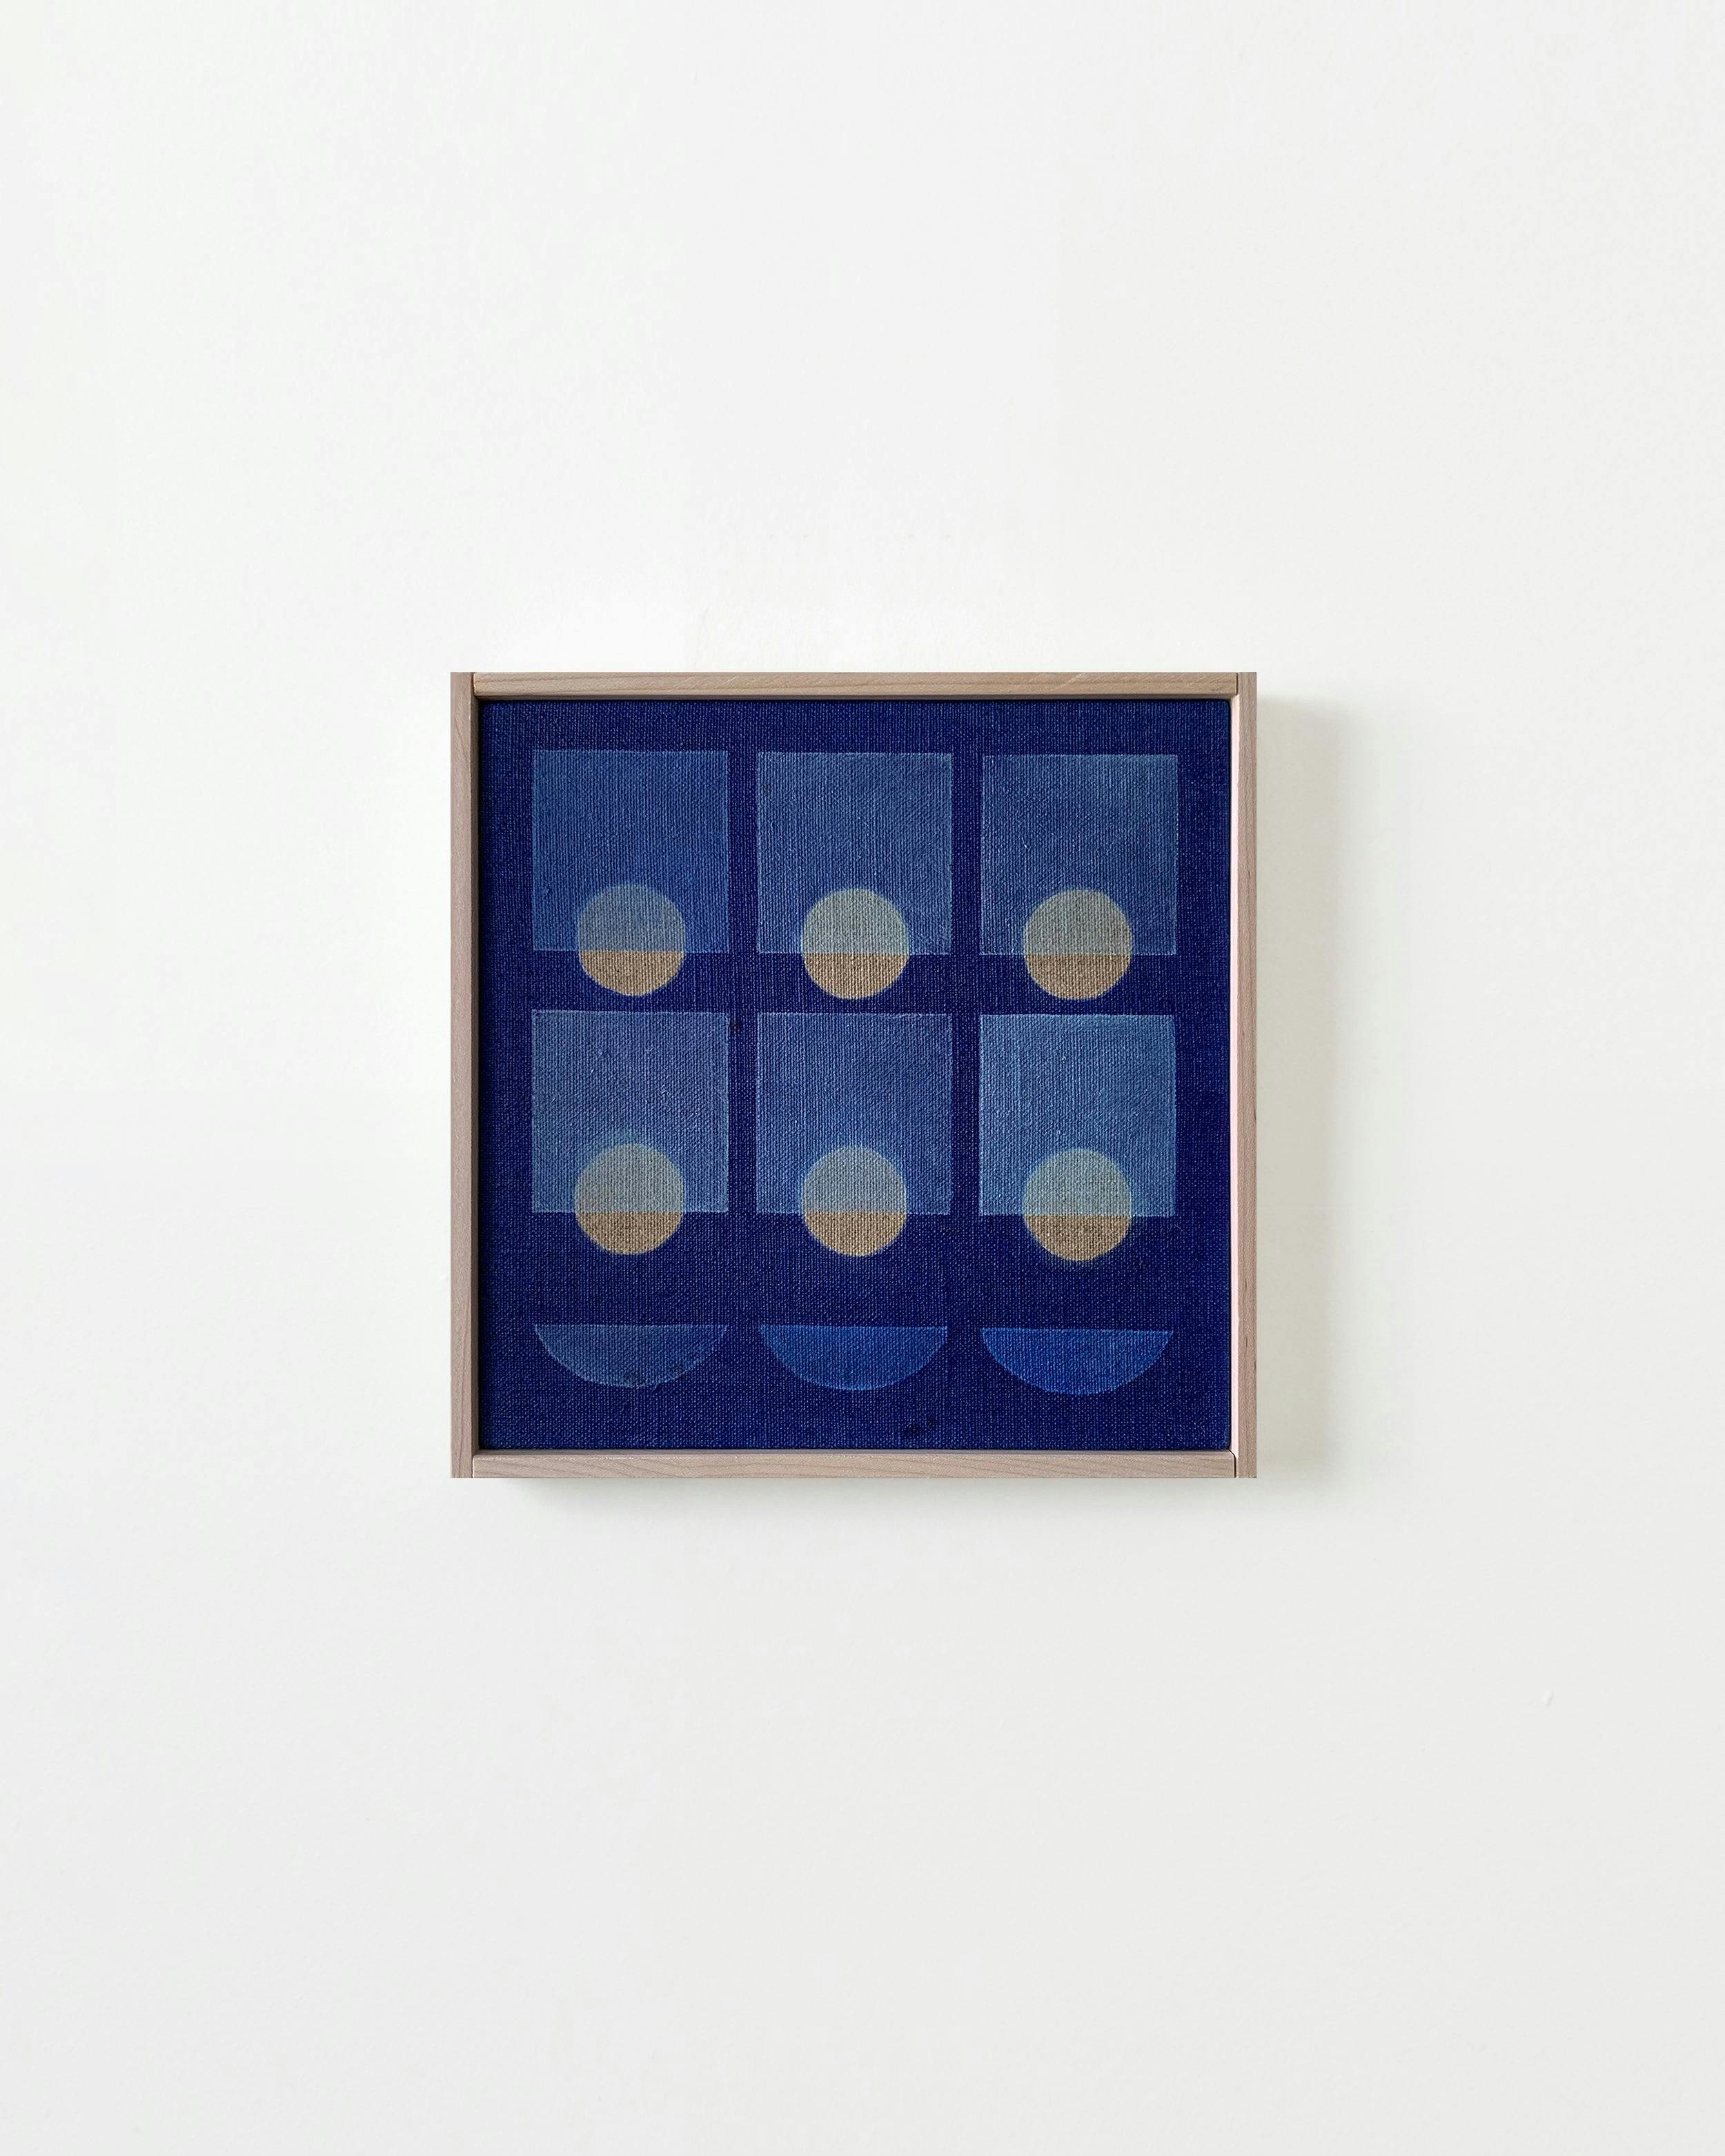 Painting by Carla Weeks titled "Grid Study in French Ultramarine 3".